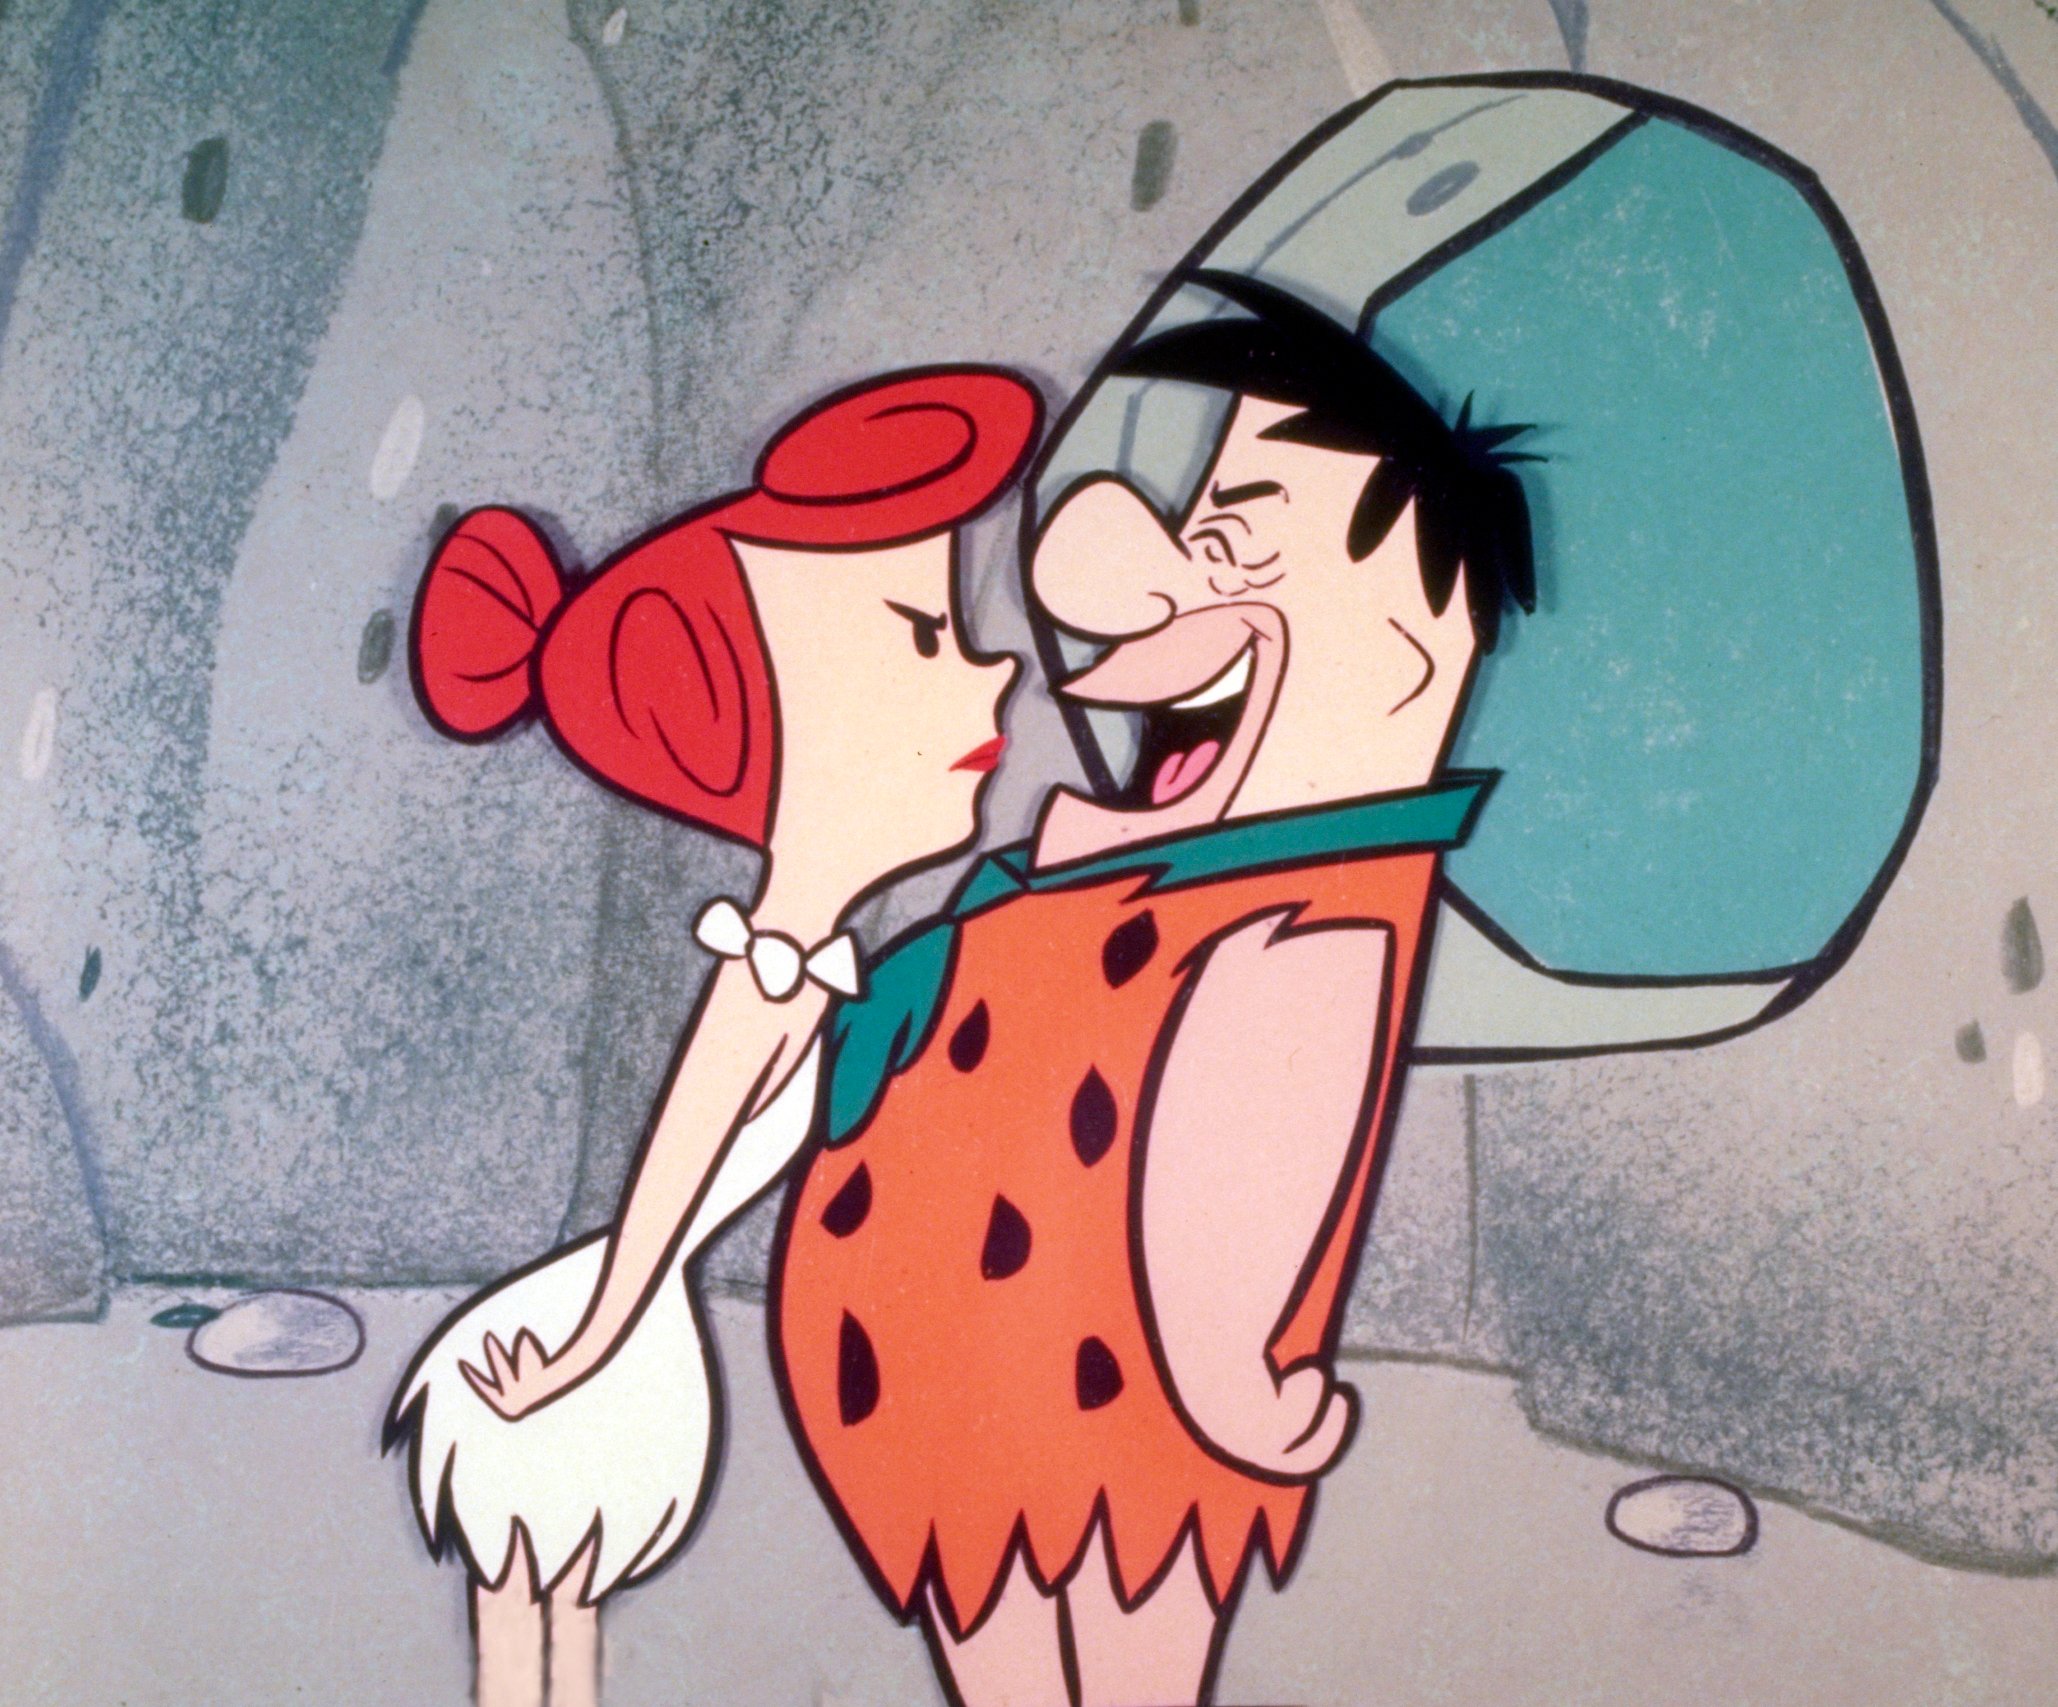 Wilma and Fred from The Flintstones in their house